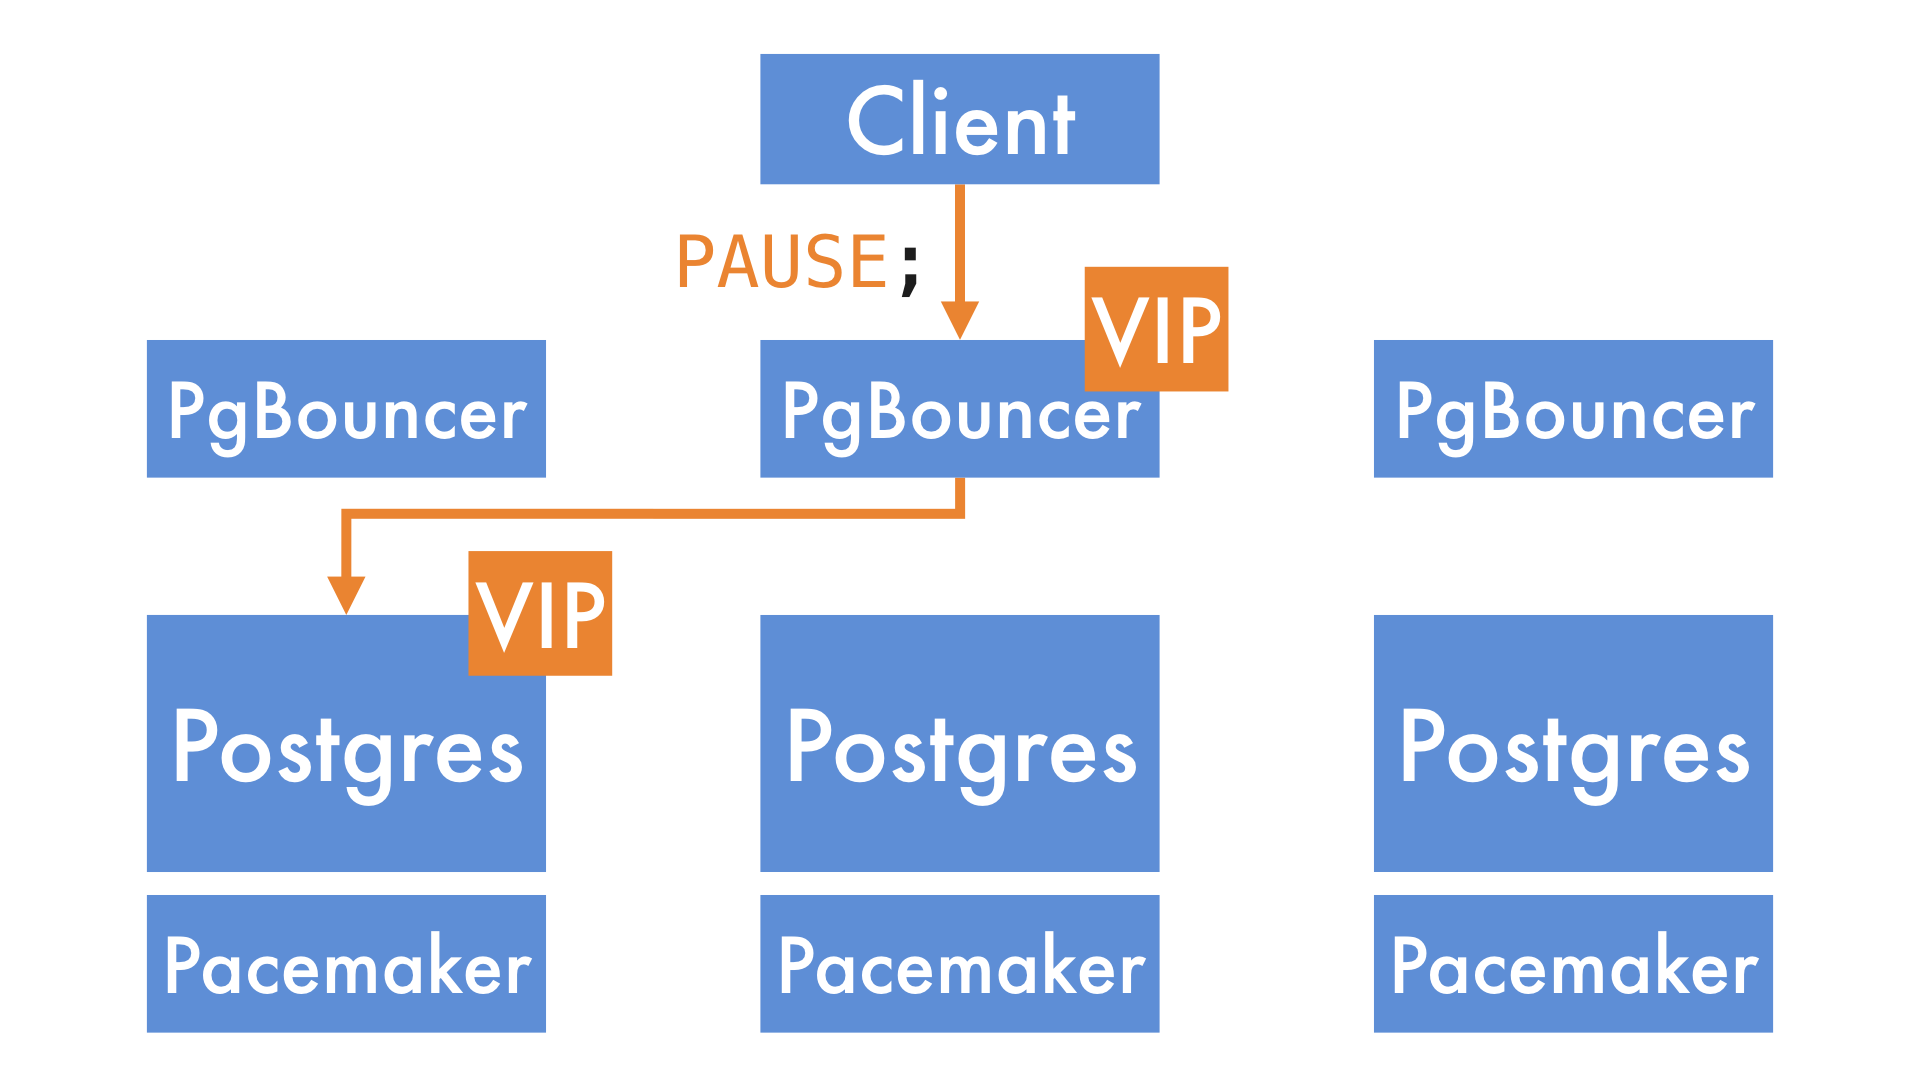 blog > images > postgres-outage-oct-2017 > pgbouncer-intro > move-vip.png